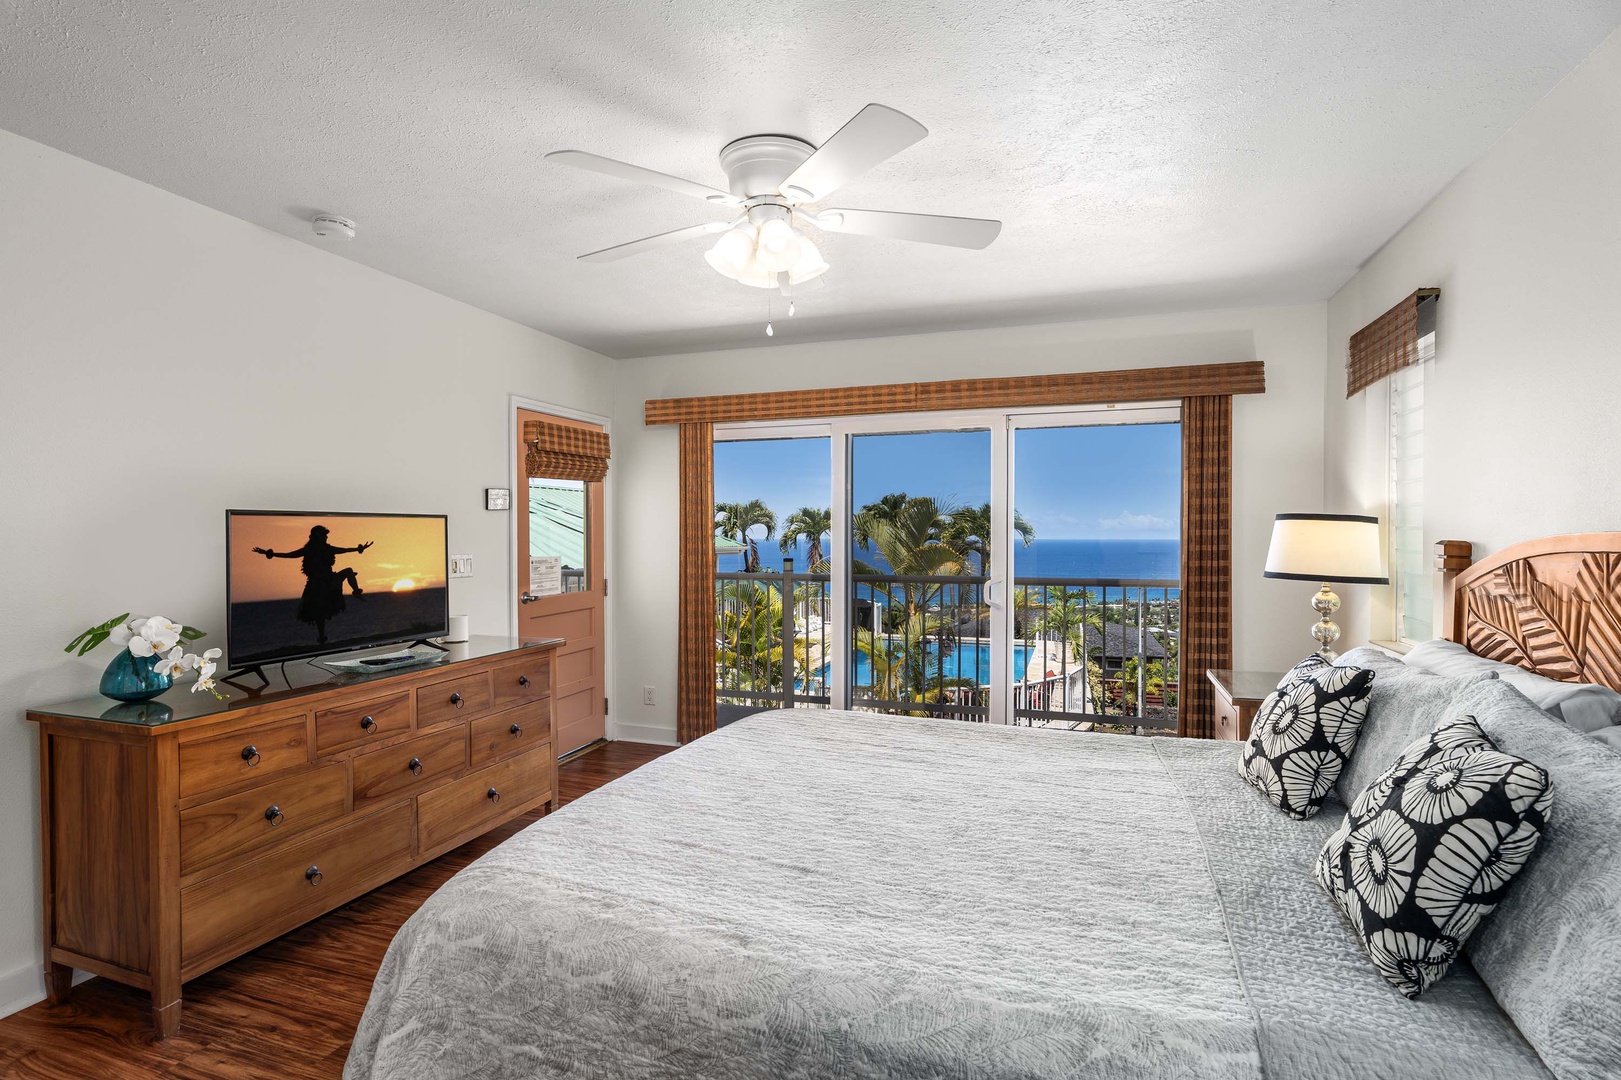 Kailua-Kona Vacation Rentals, Honu Hale - Views out to the horizon and smart TV equipped